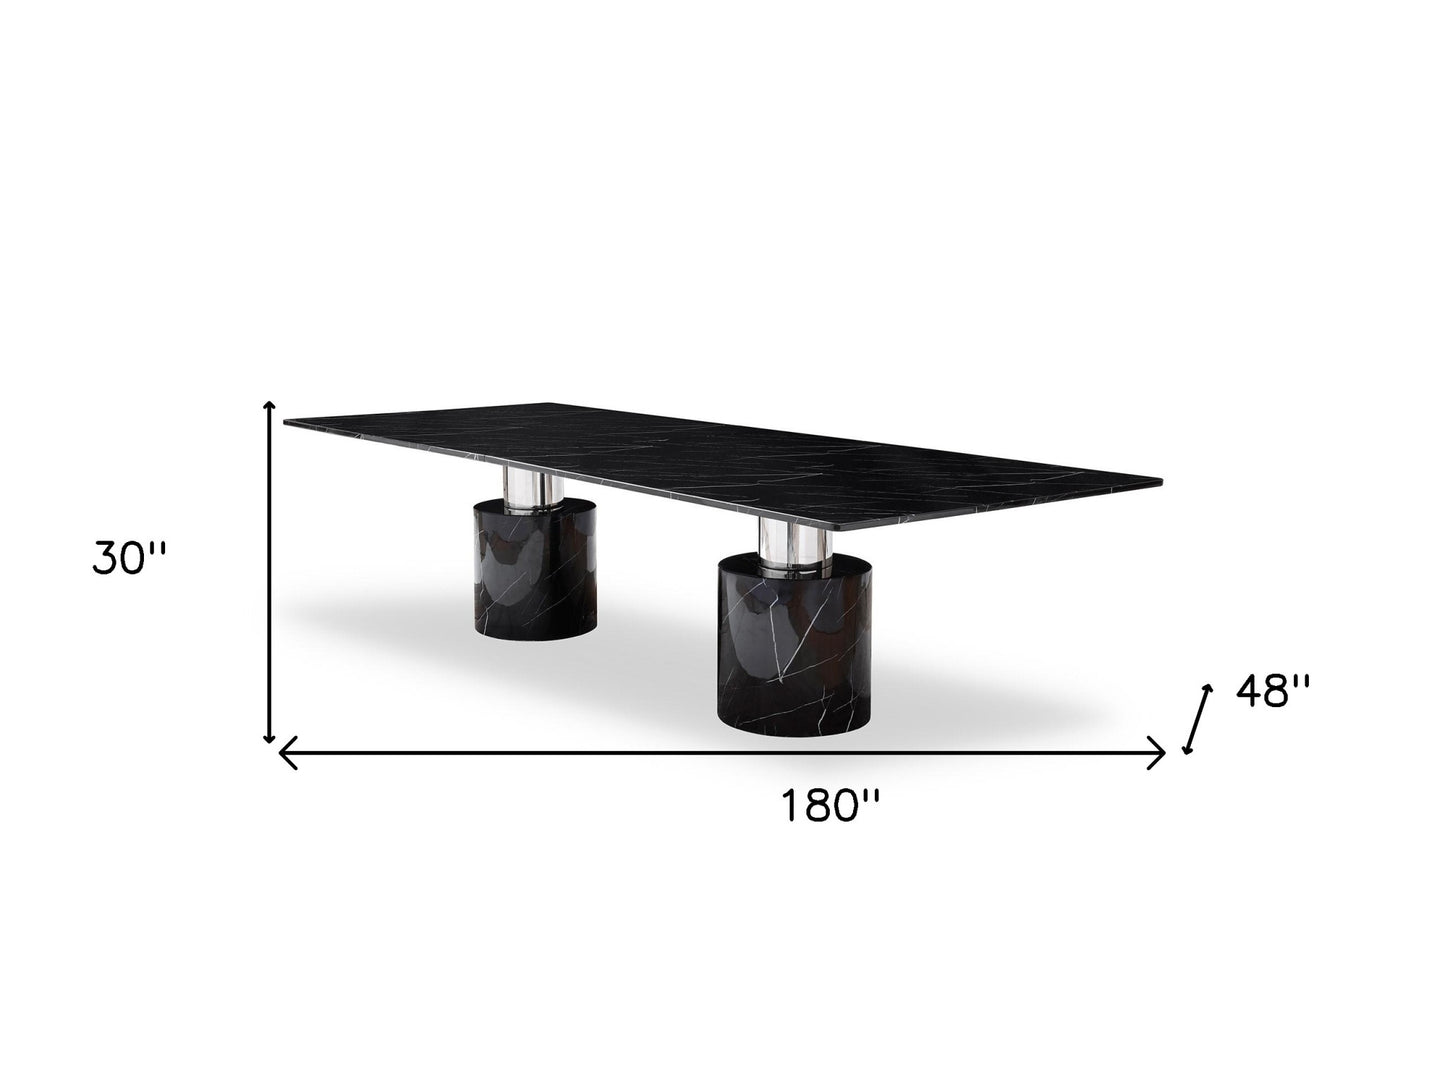 180" Black Marble Double Pedestal Base Dining Table